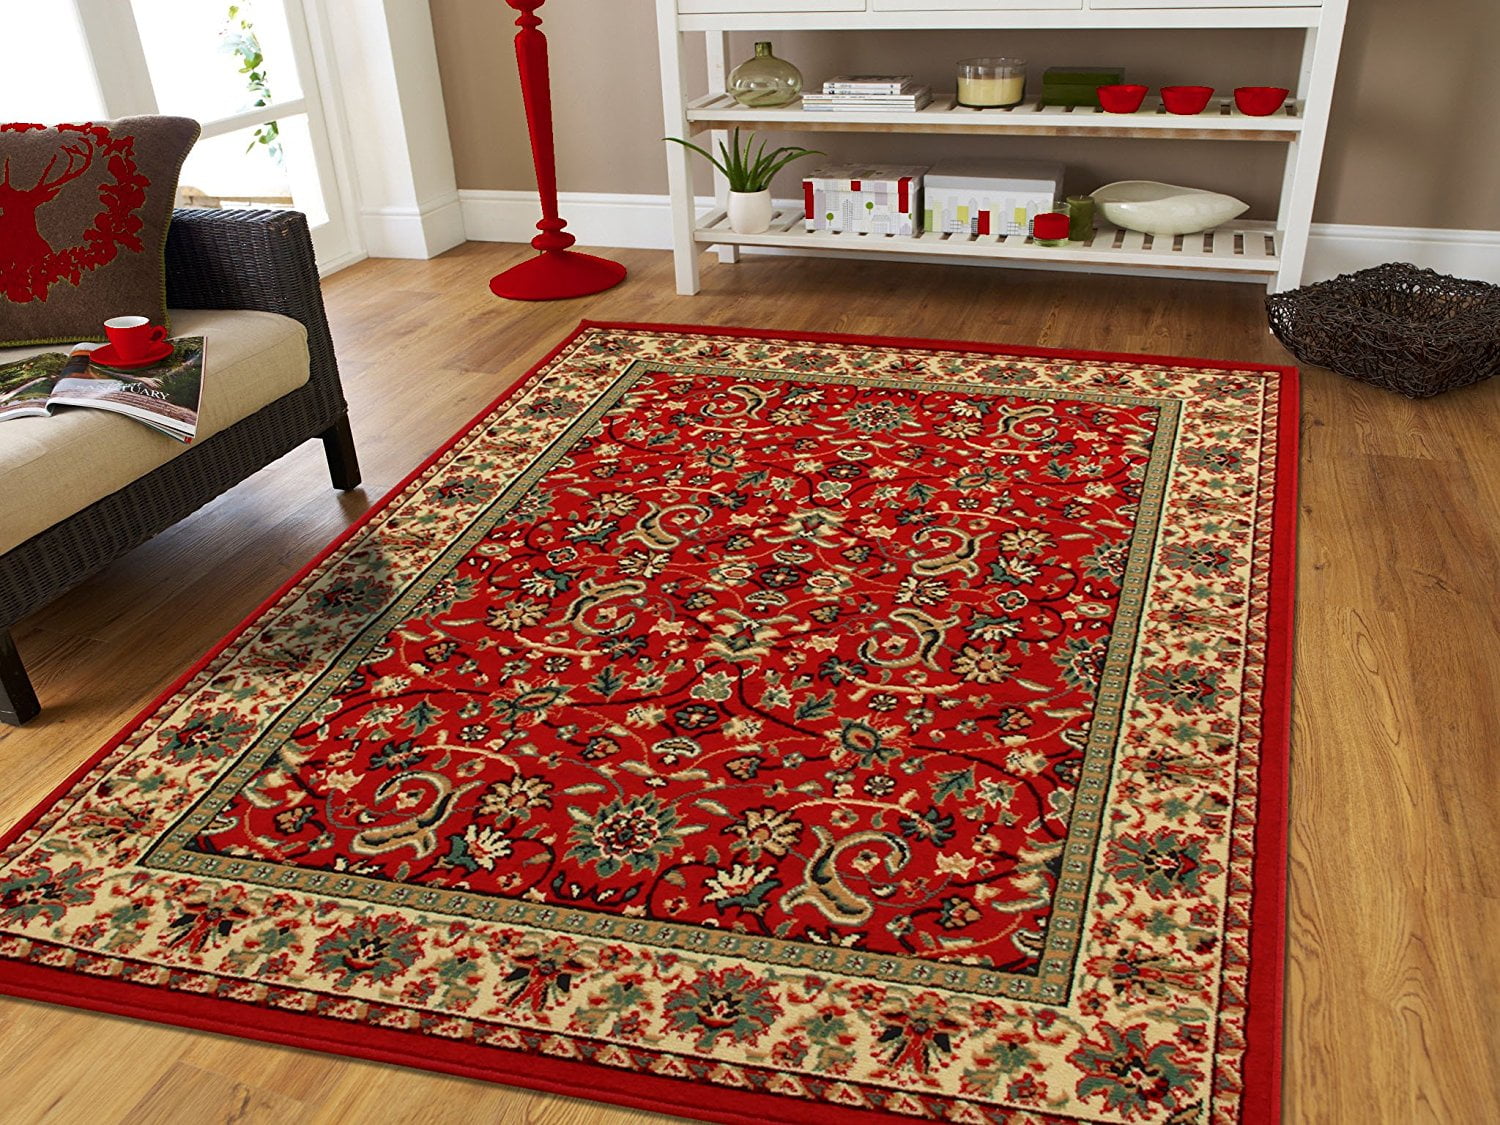 Multicoloured Floral Rug Classic Living Room Rugs Small Large Red Damask Rug